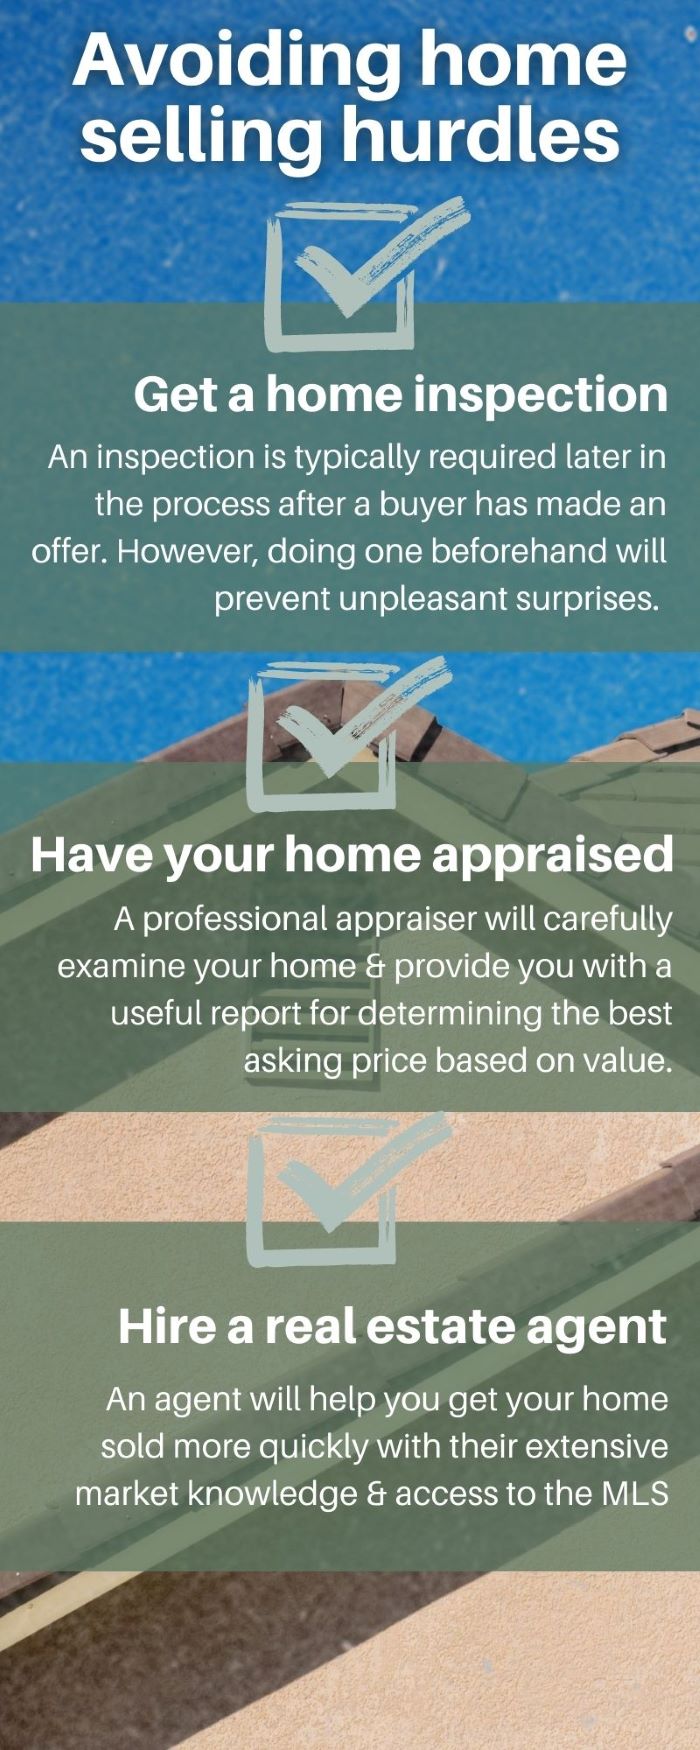 How to avoid common home selling hurdles infographic